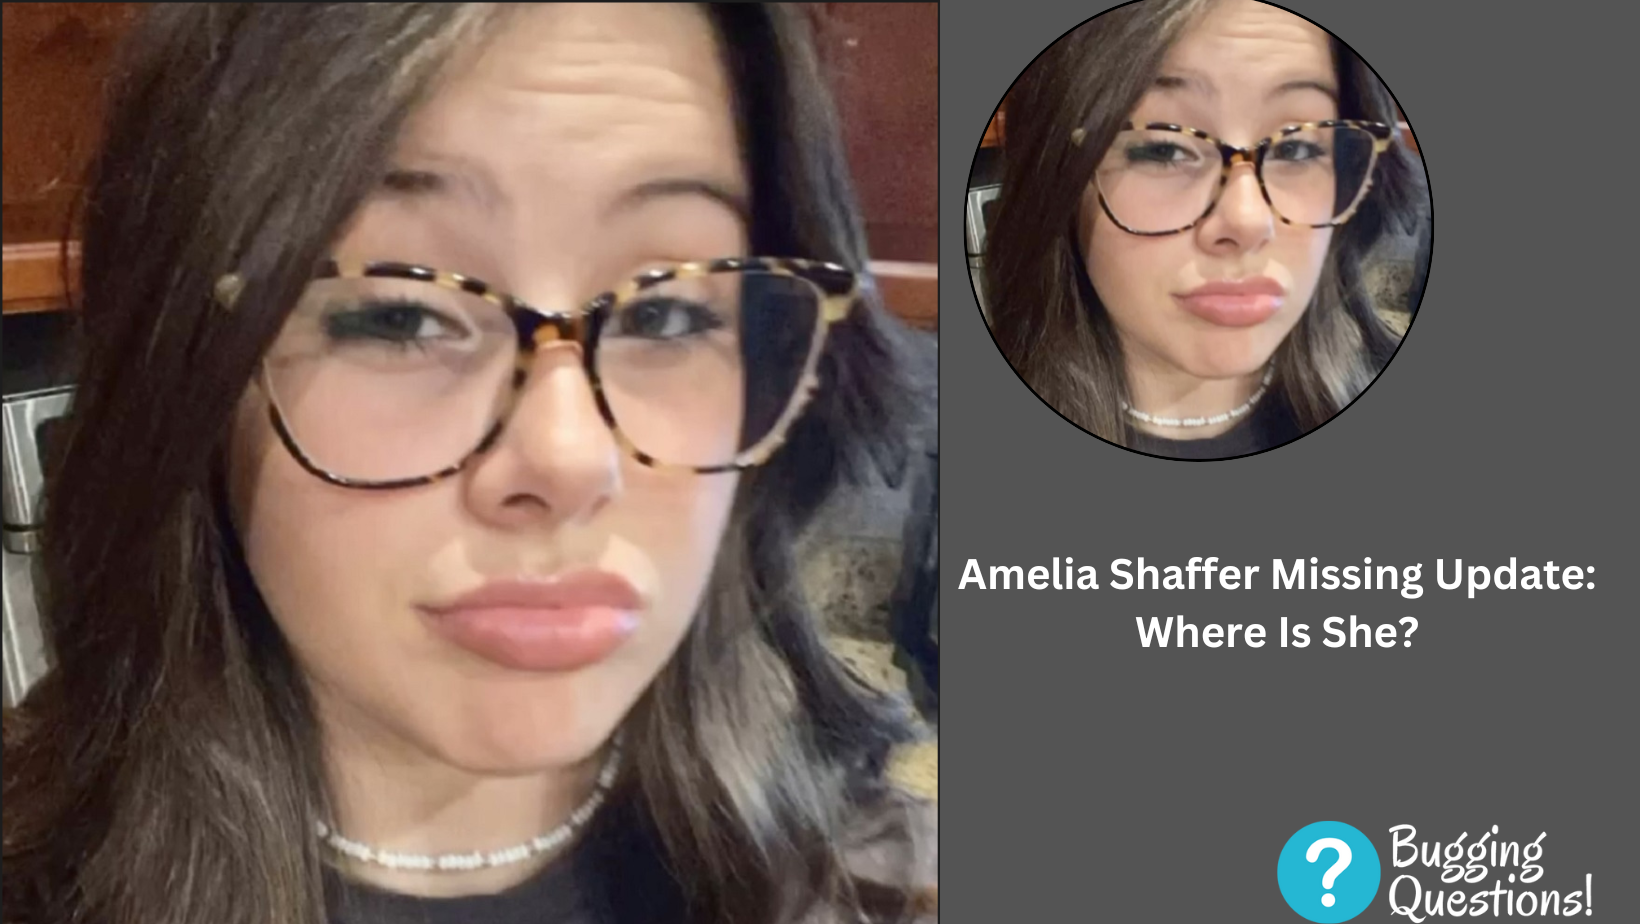 Amelia Shaffer Missing Update: Where Is She?